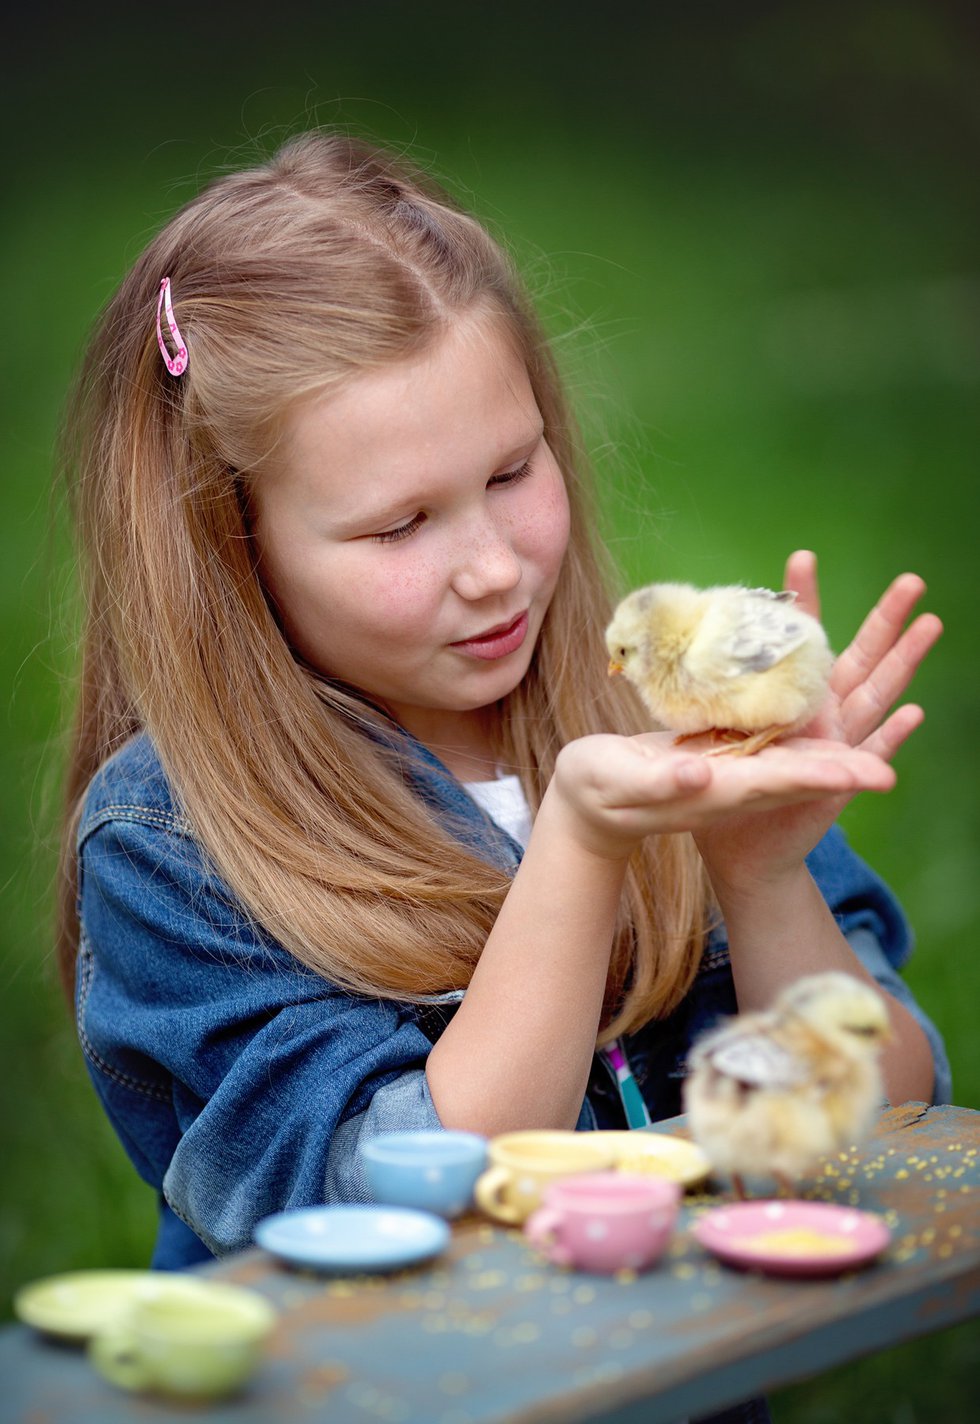 imagesevents27426girl-with-chick-jpg.jpe